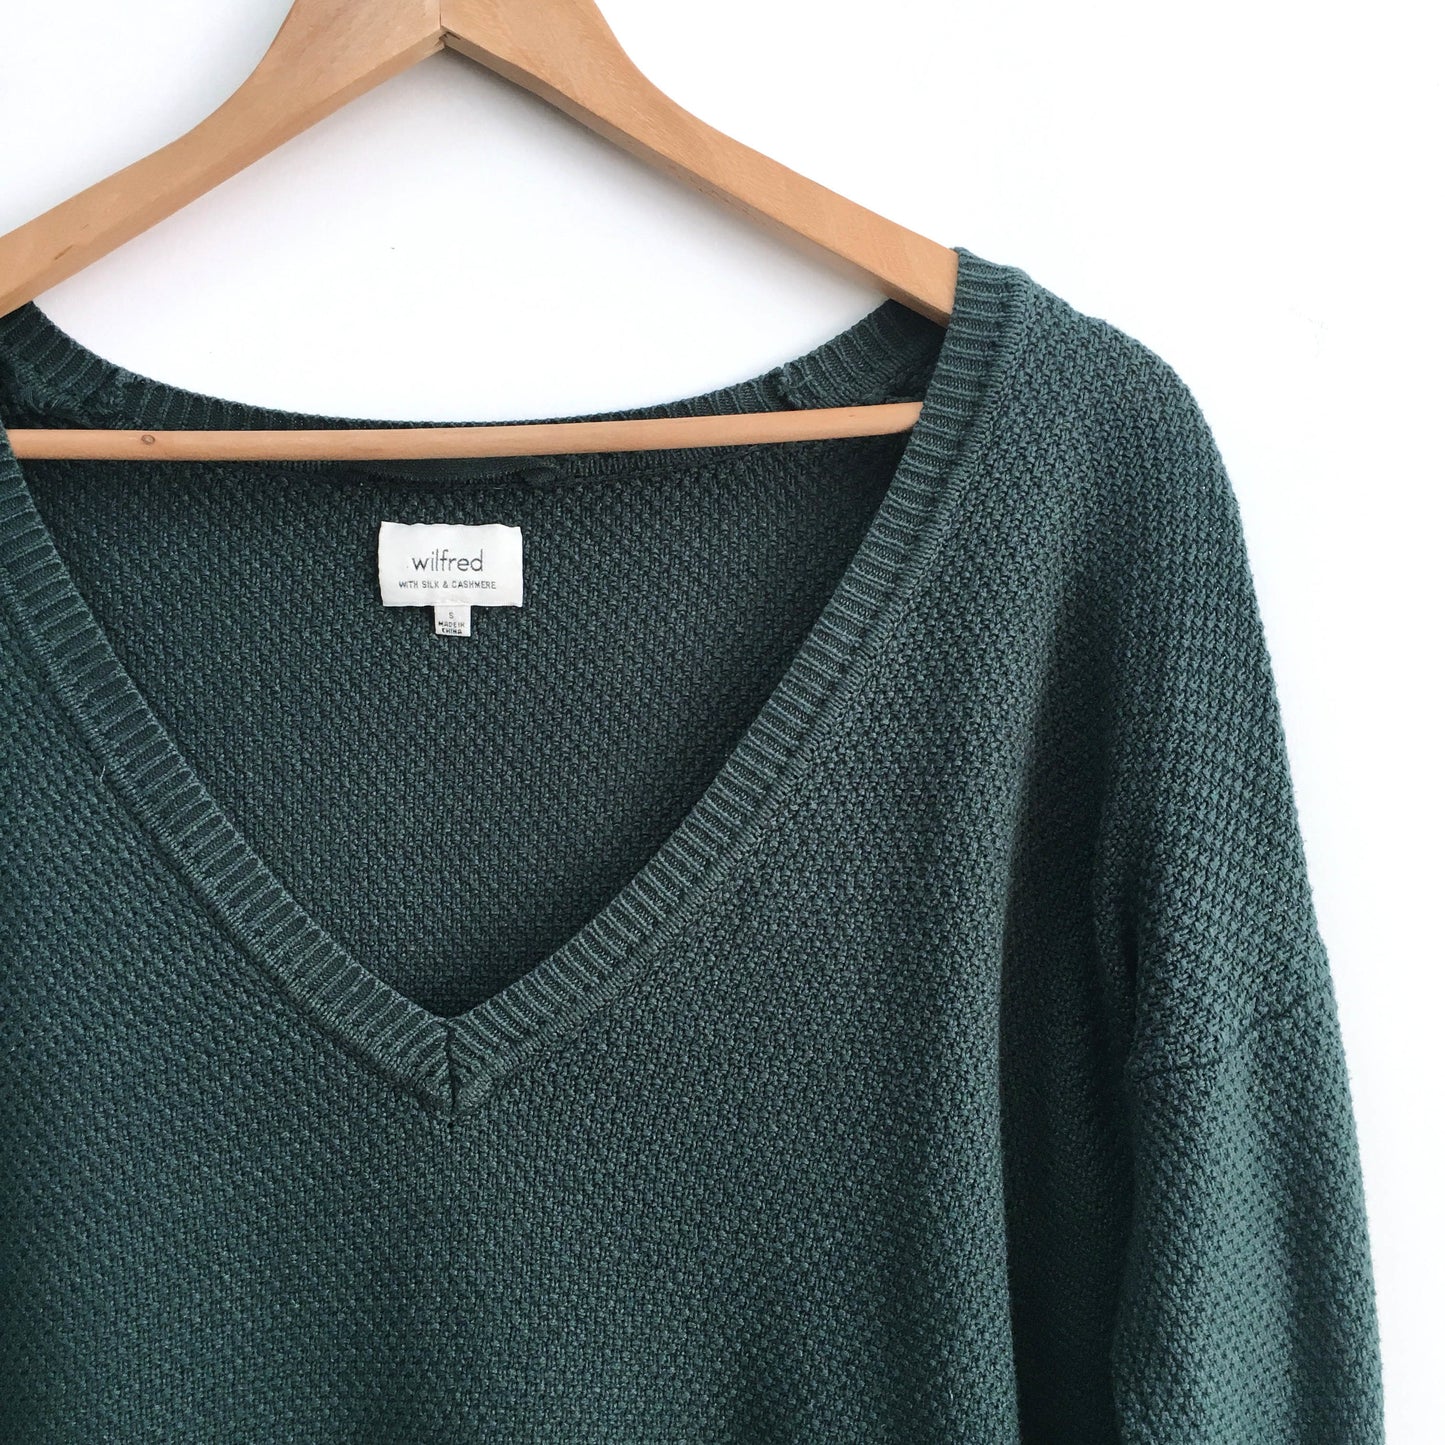 Wilfred Galois Sweater - size Small